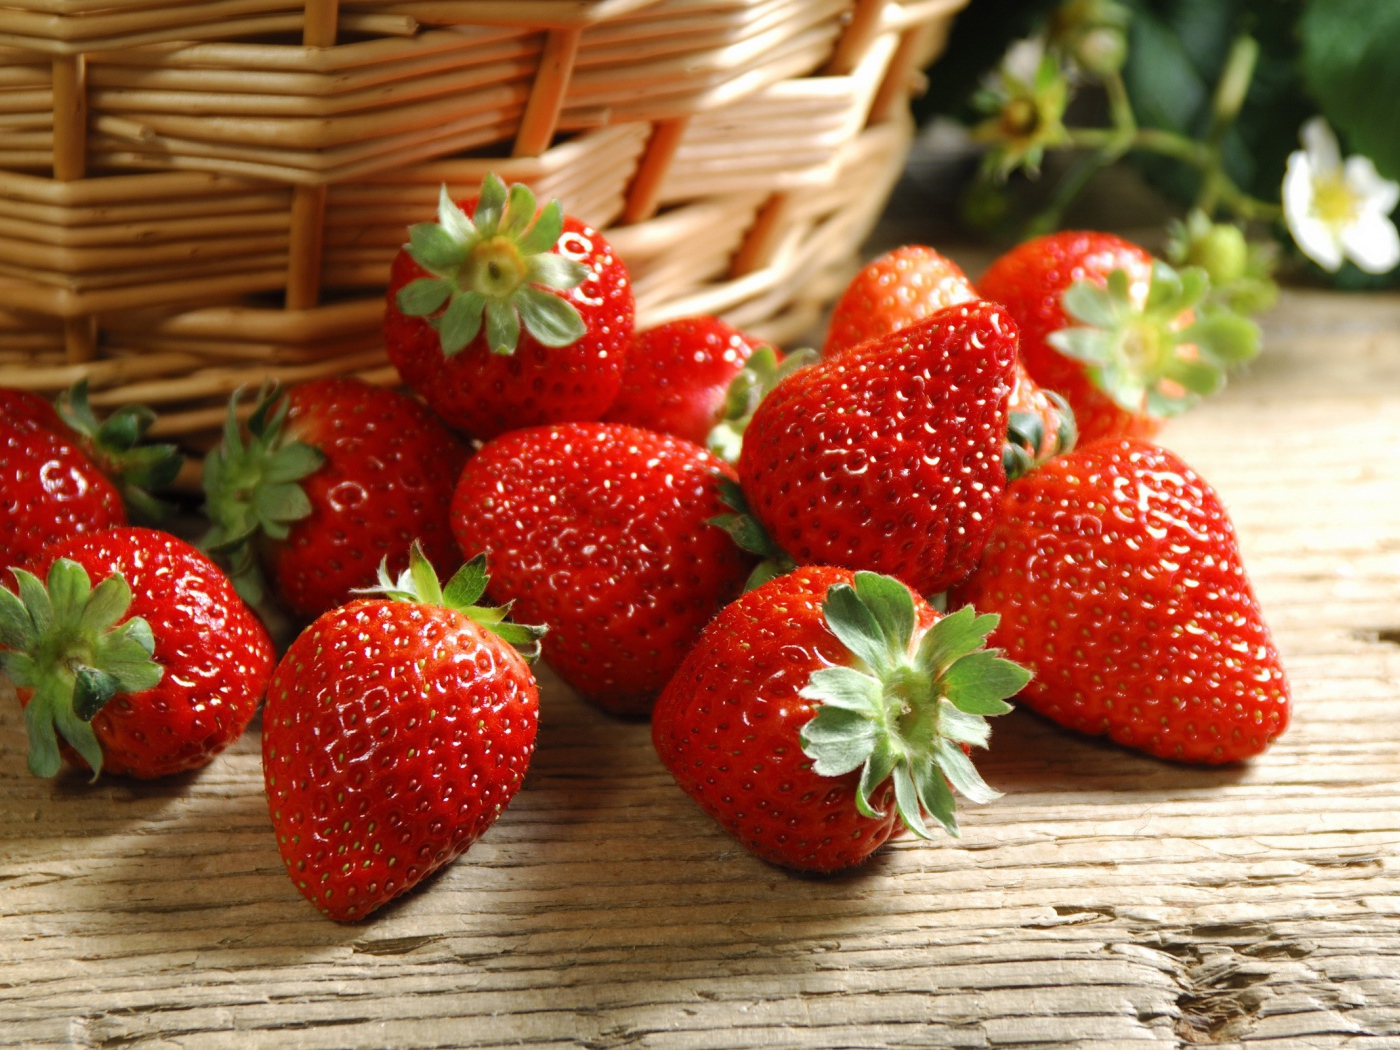 Strawberry and basket